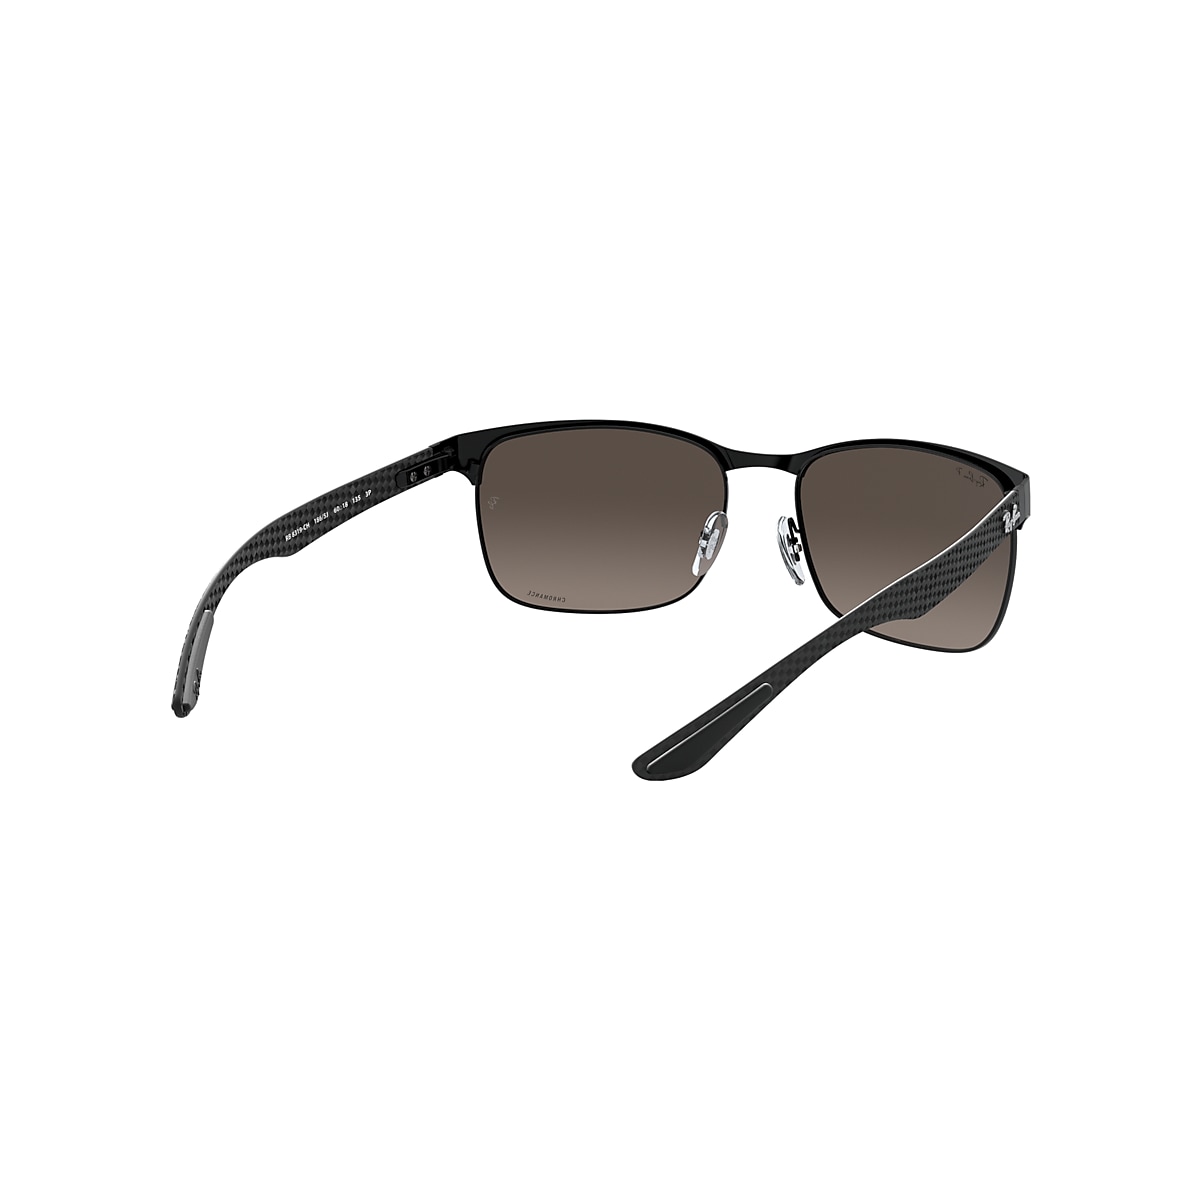 RB8319CH CHROMANCE Sunglasses in Black and Silver - RB8319CH | Ray 